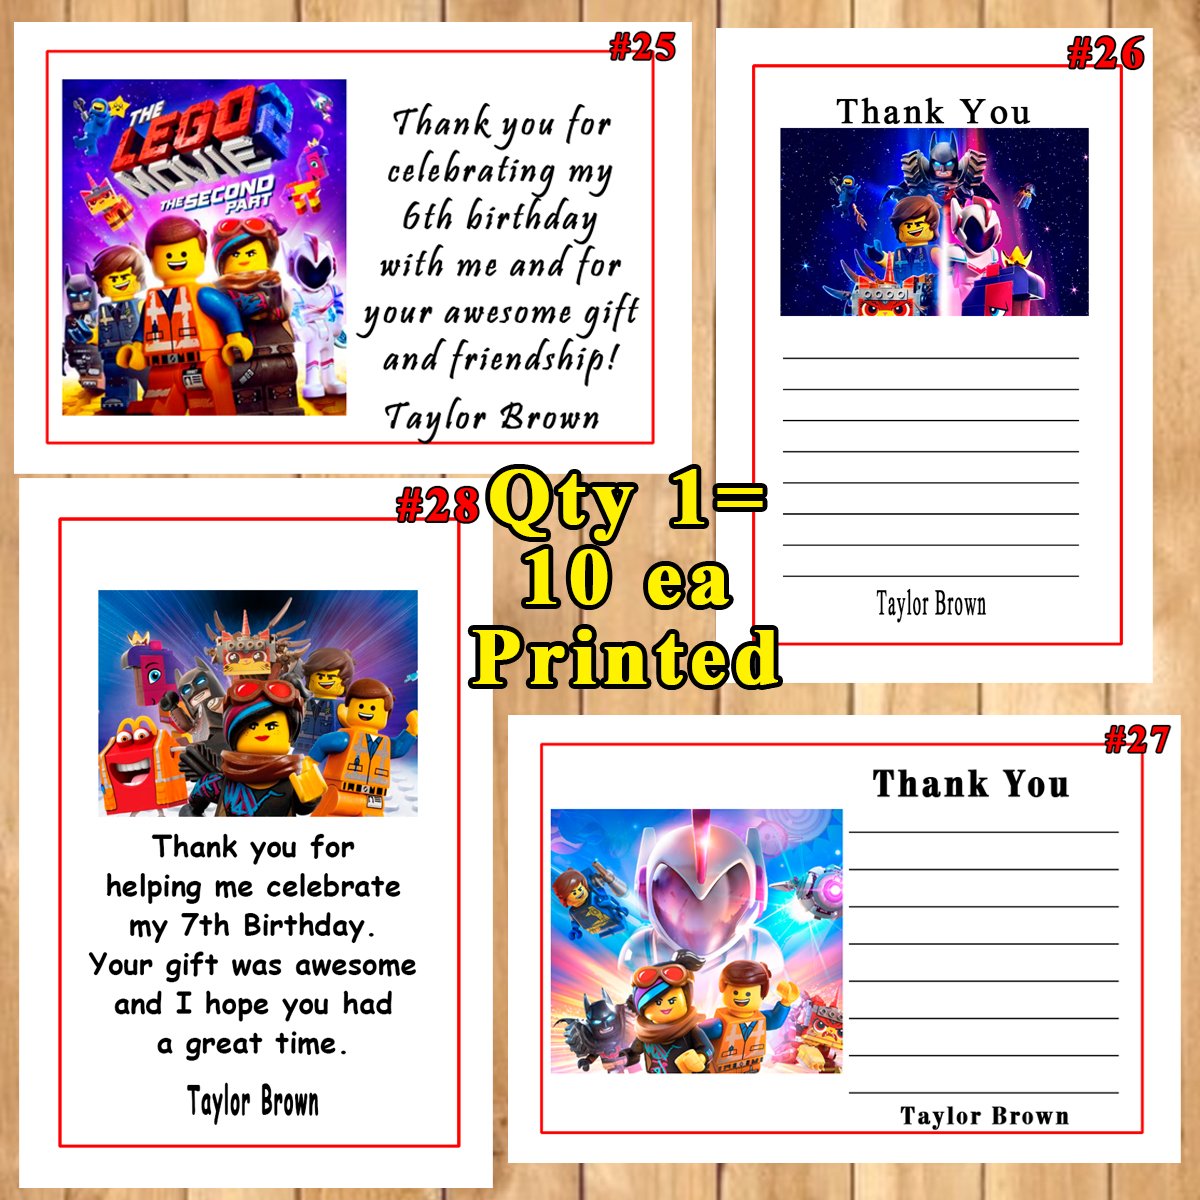 Lego Birthday Thank You Cards 10 ea Personalized Custom Made